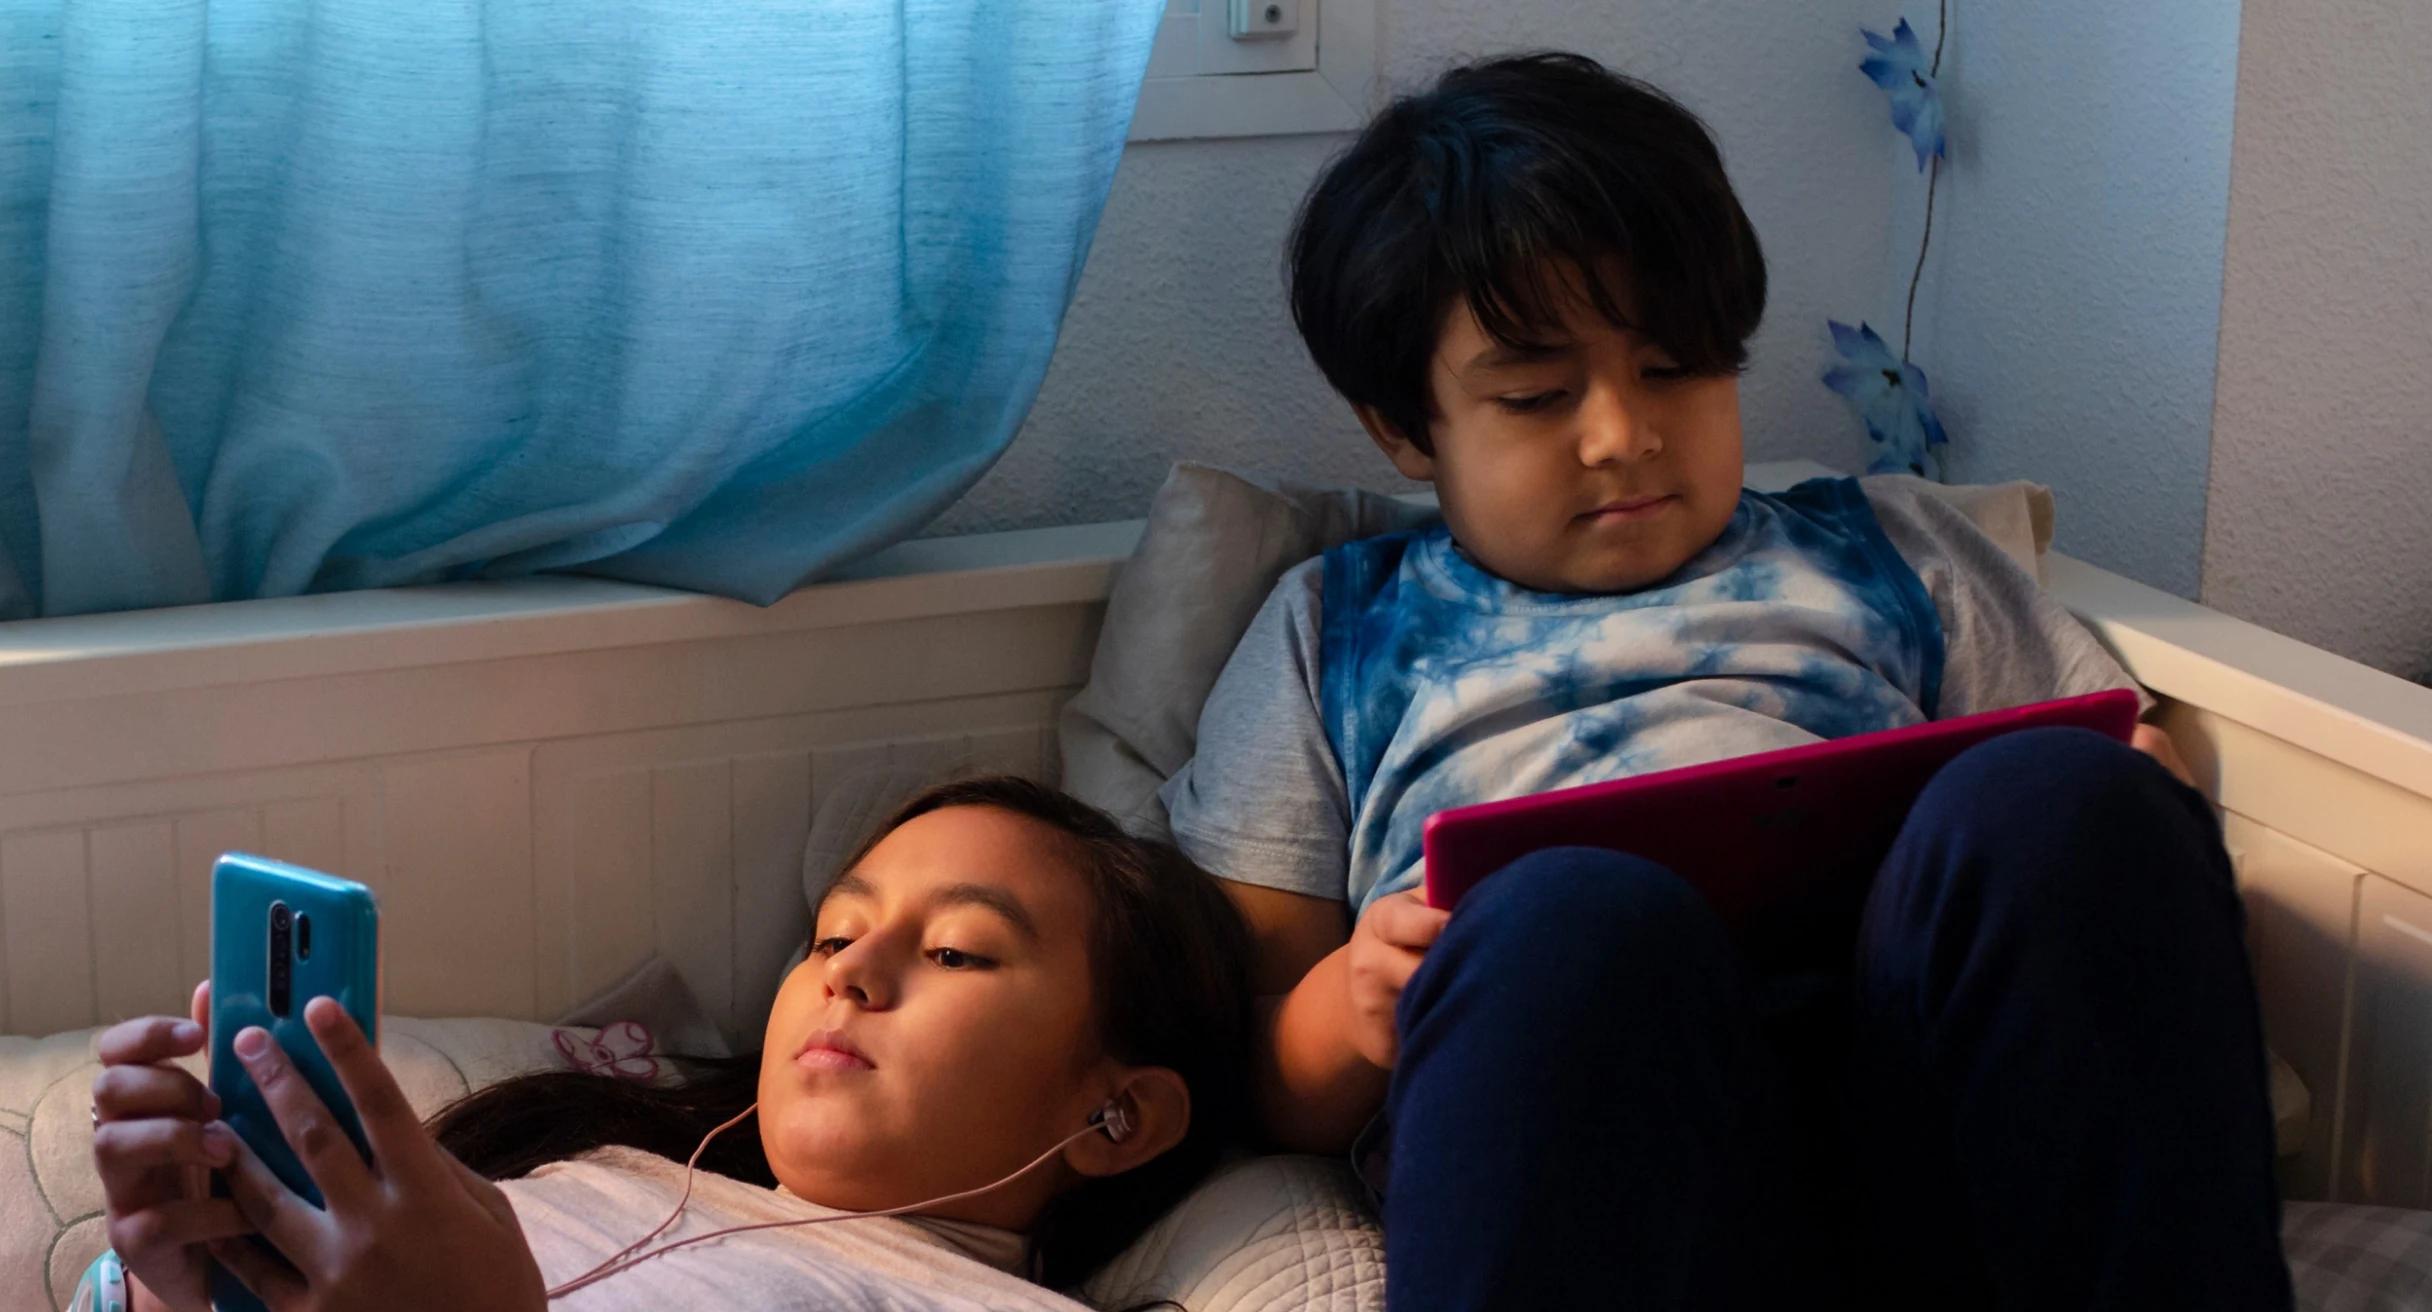 A Latinx girl and boy lounge on a bed with their mobile devices in hand